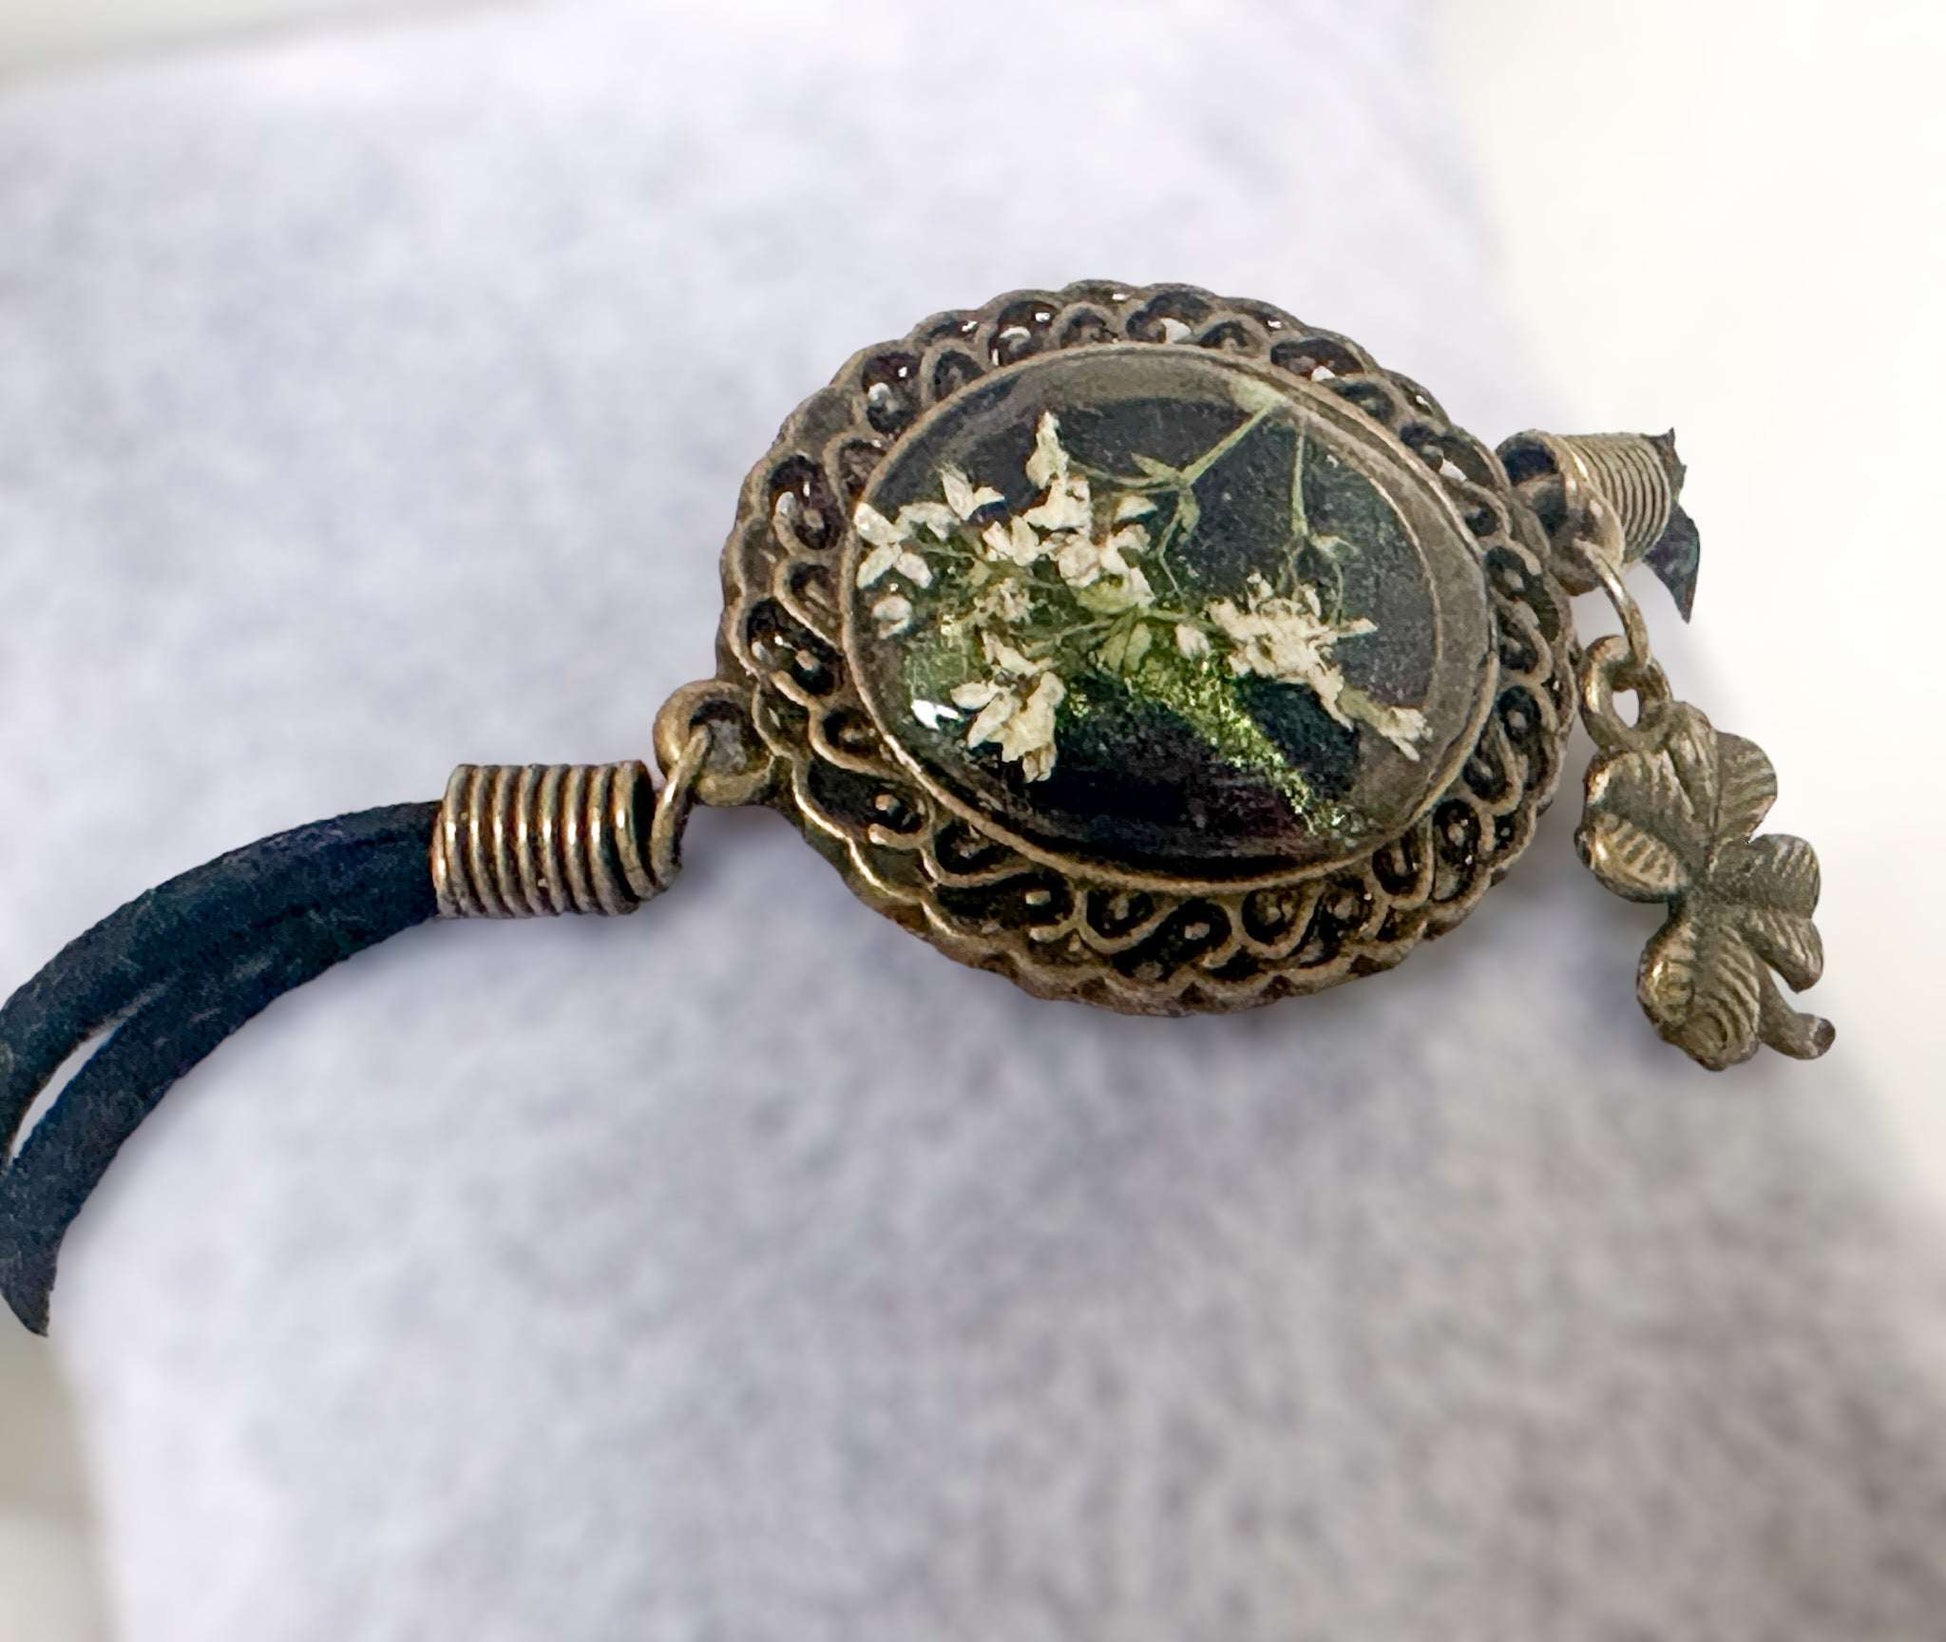 White Blossom Resin Bracelet with Dried Flower Accents